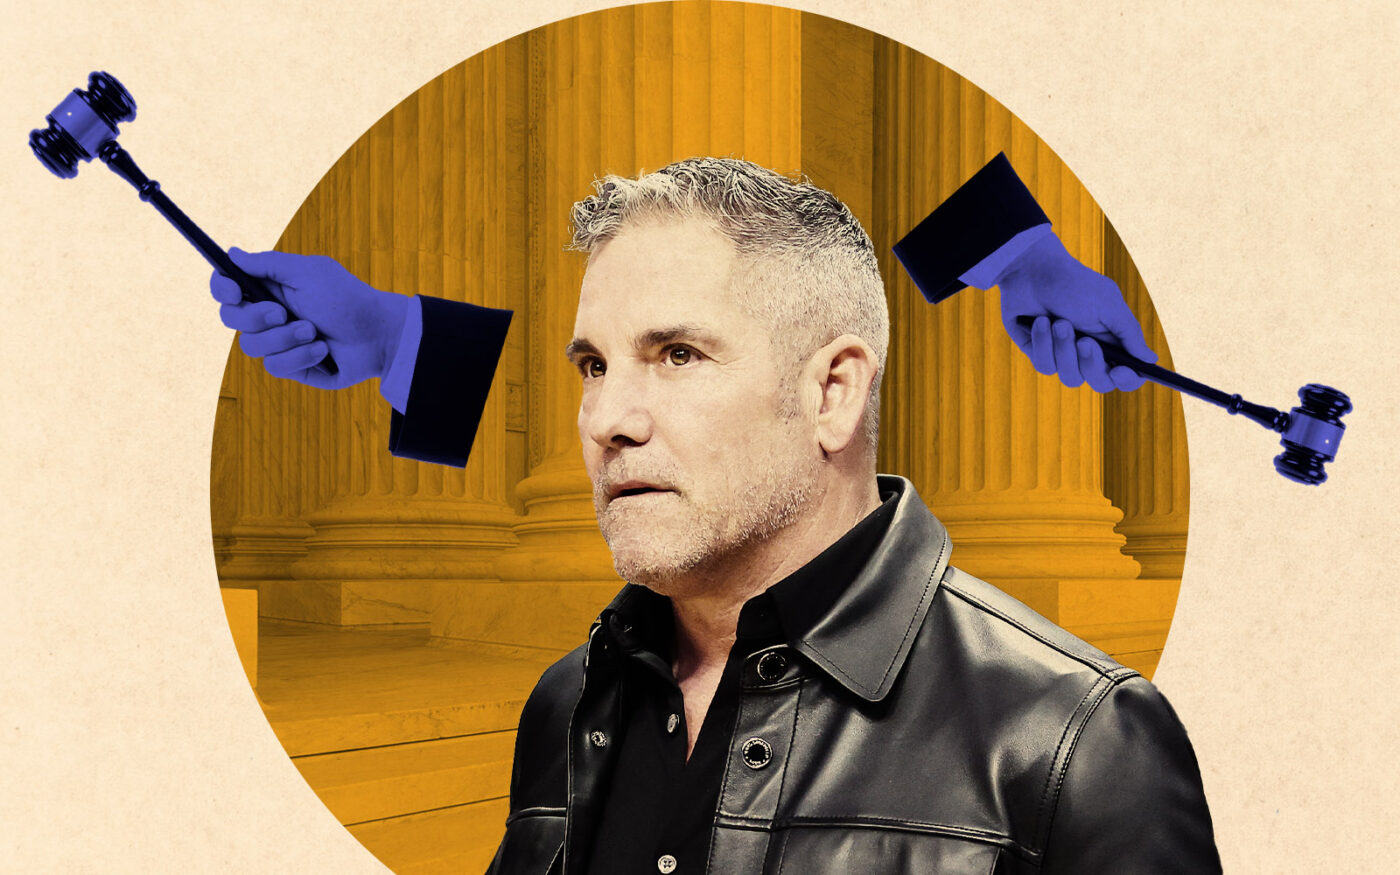 Grant Cardone Hit With New Class Action Lawsuit